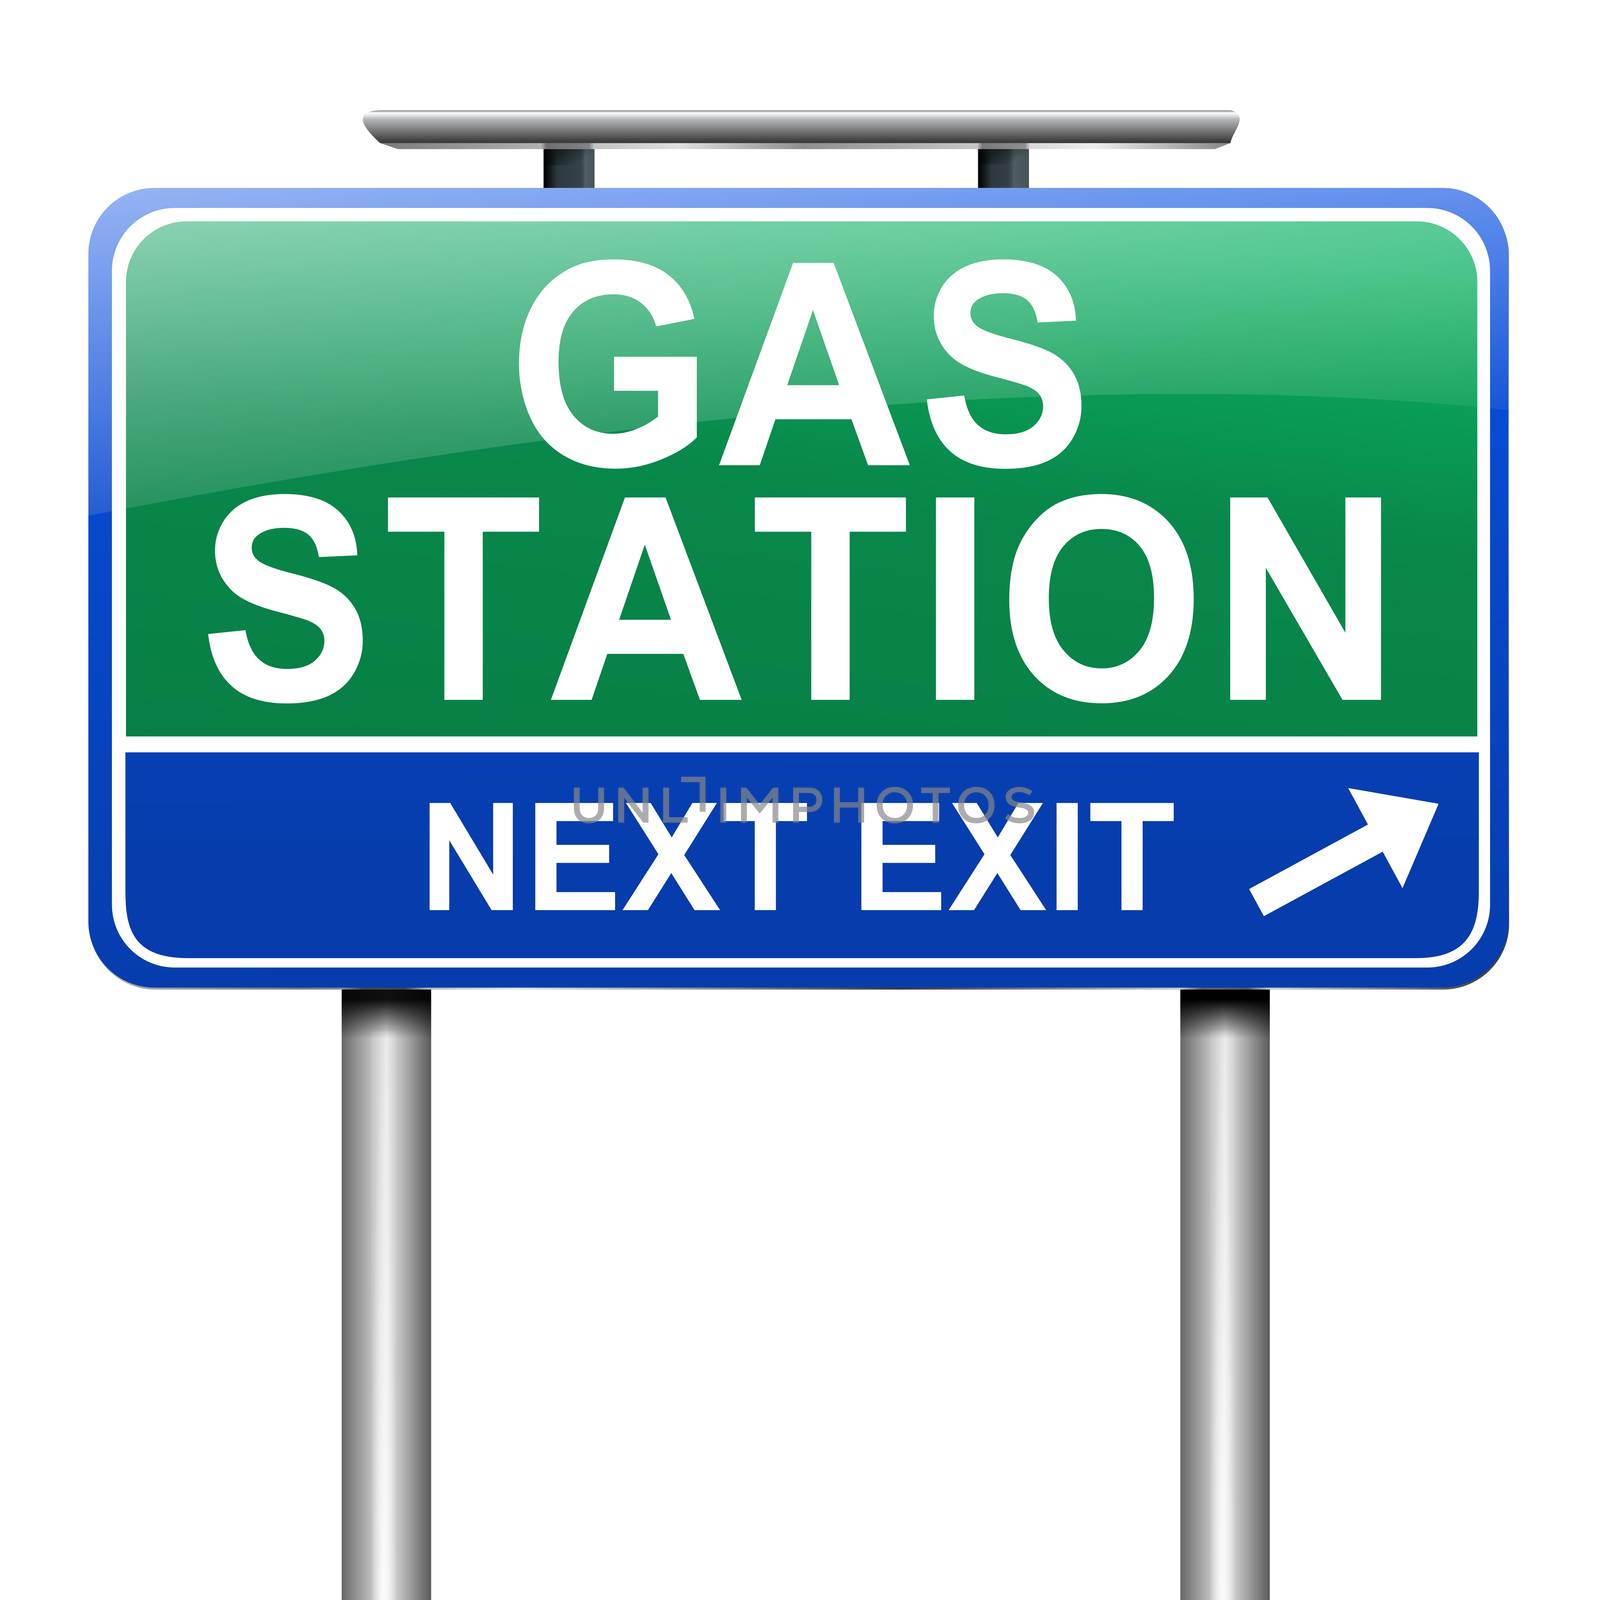 Gas station sign. by 72soul